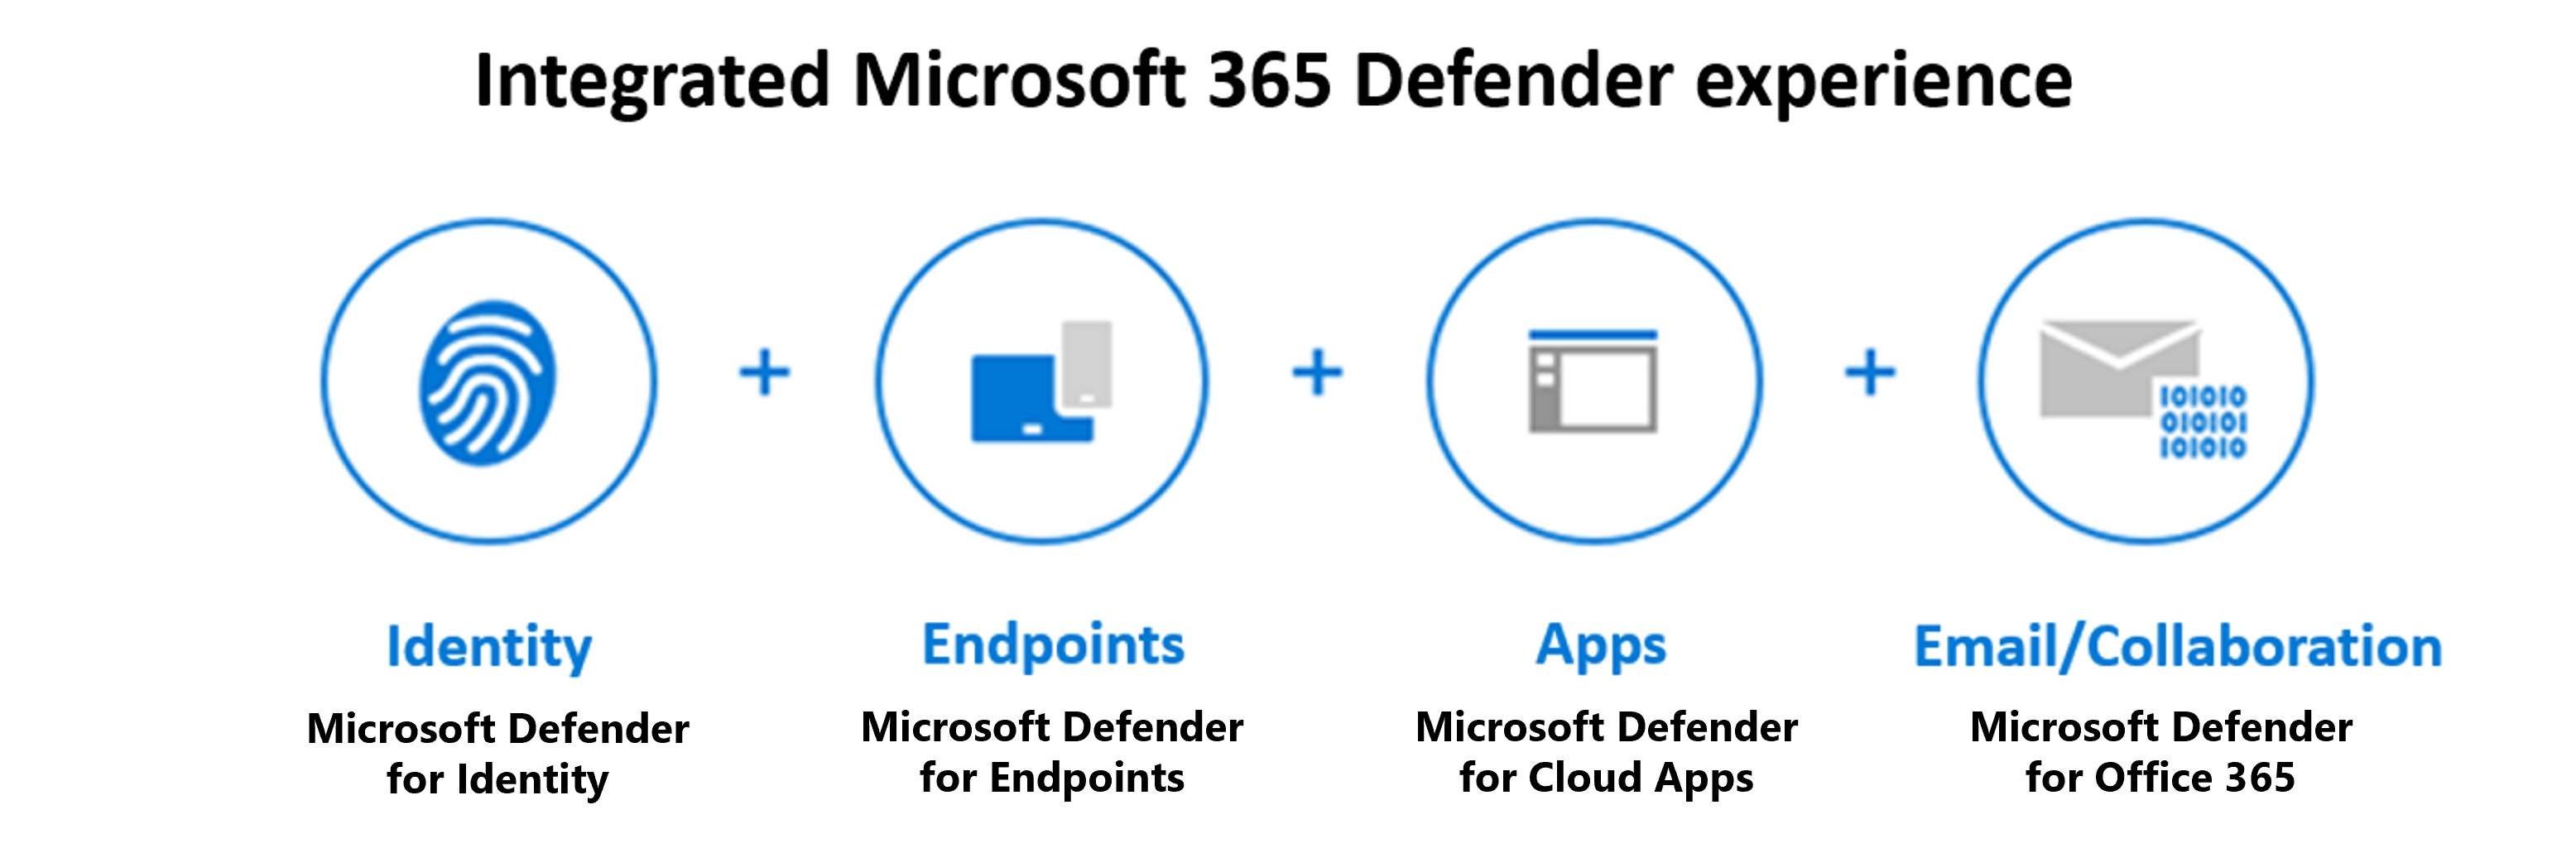 Diagram that shows the four aspects that make up the Microsoft 365 Defender suite: identity, endpoints, apps, and email.